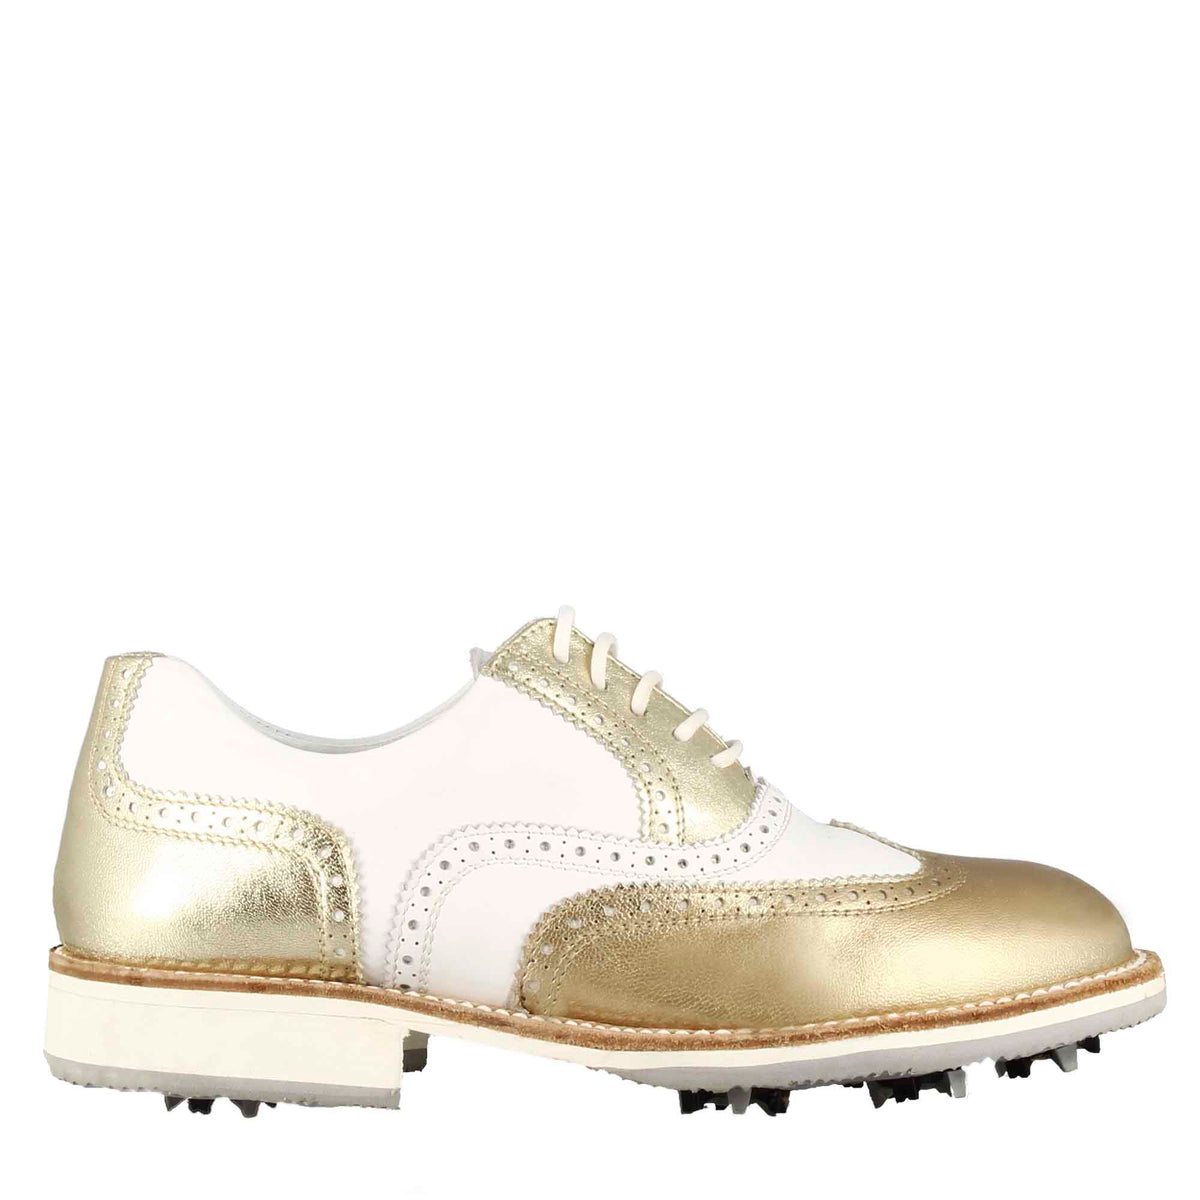 Handcrafted man's golf shoes in white leather with gold-colored details